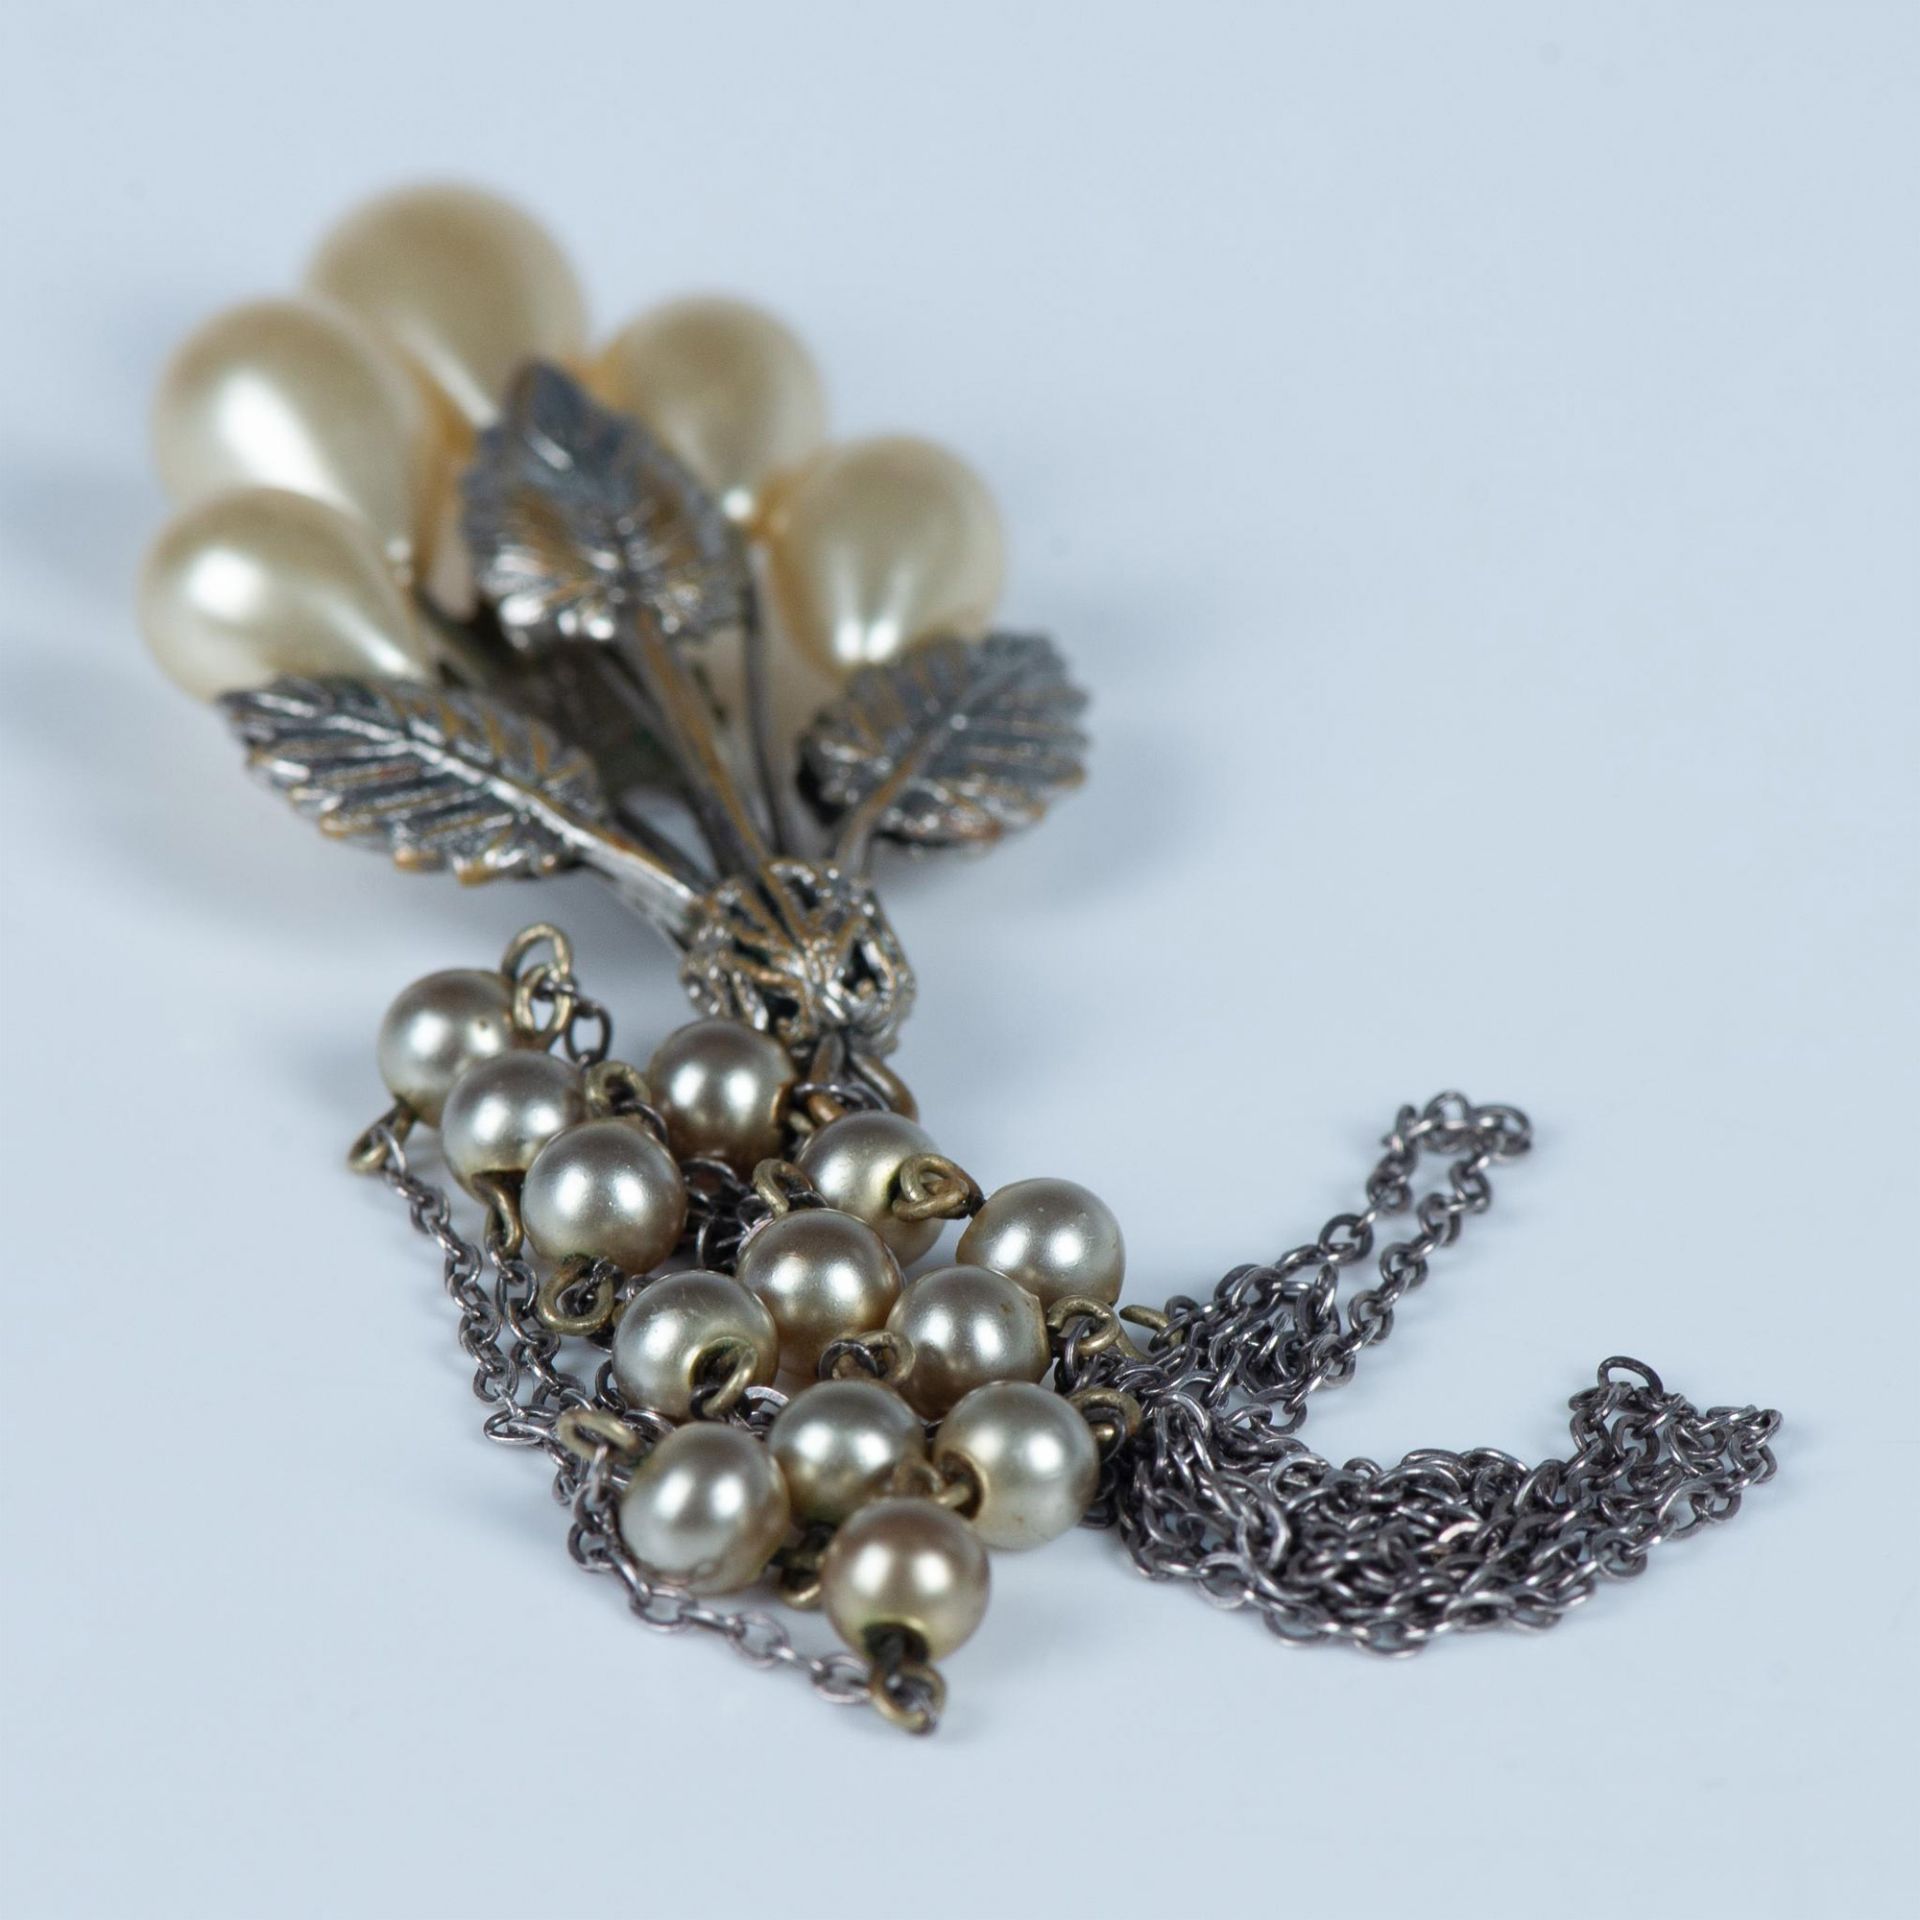 Long Silver Metal and Faux Pearl Leaf Necklace - Image 5 of 5